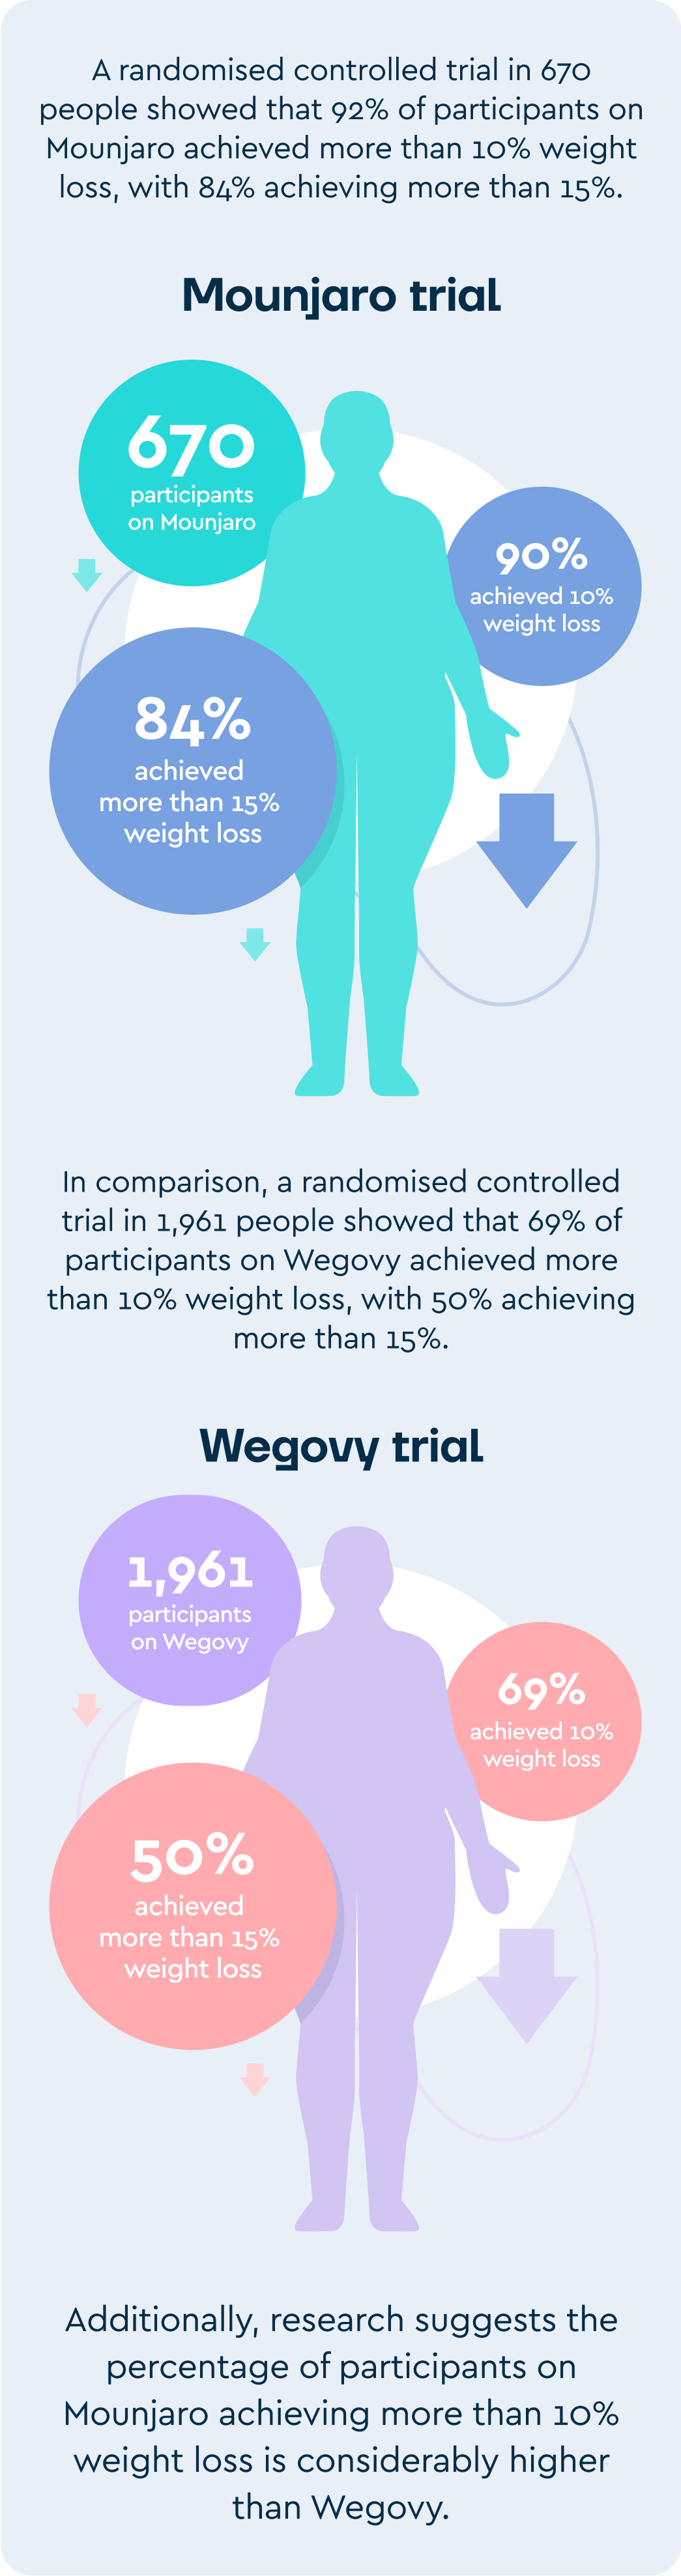 A graphic showing the difference in weight loss between Mounjaro and Wegovy